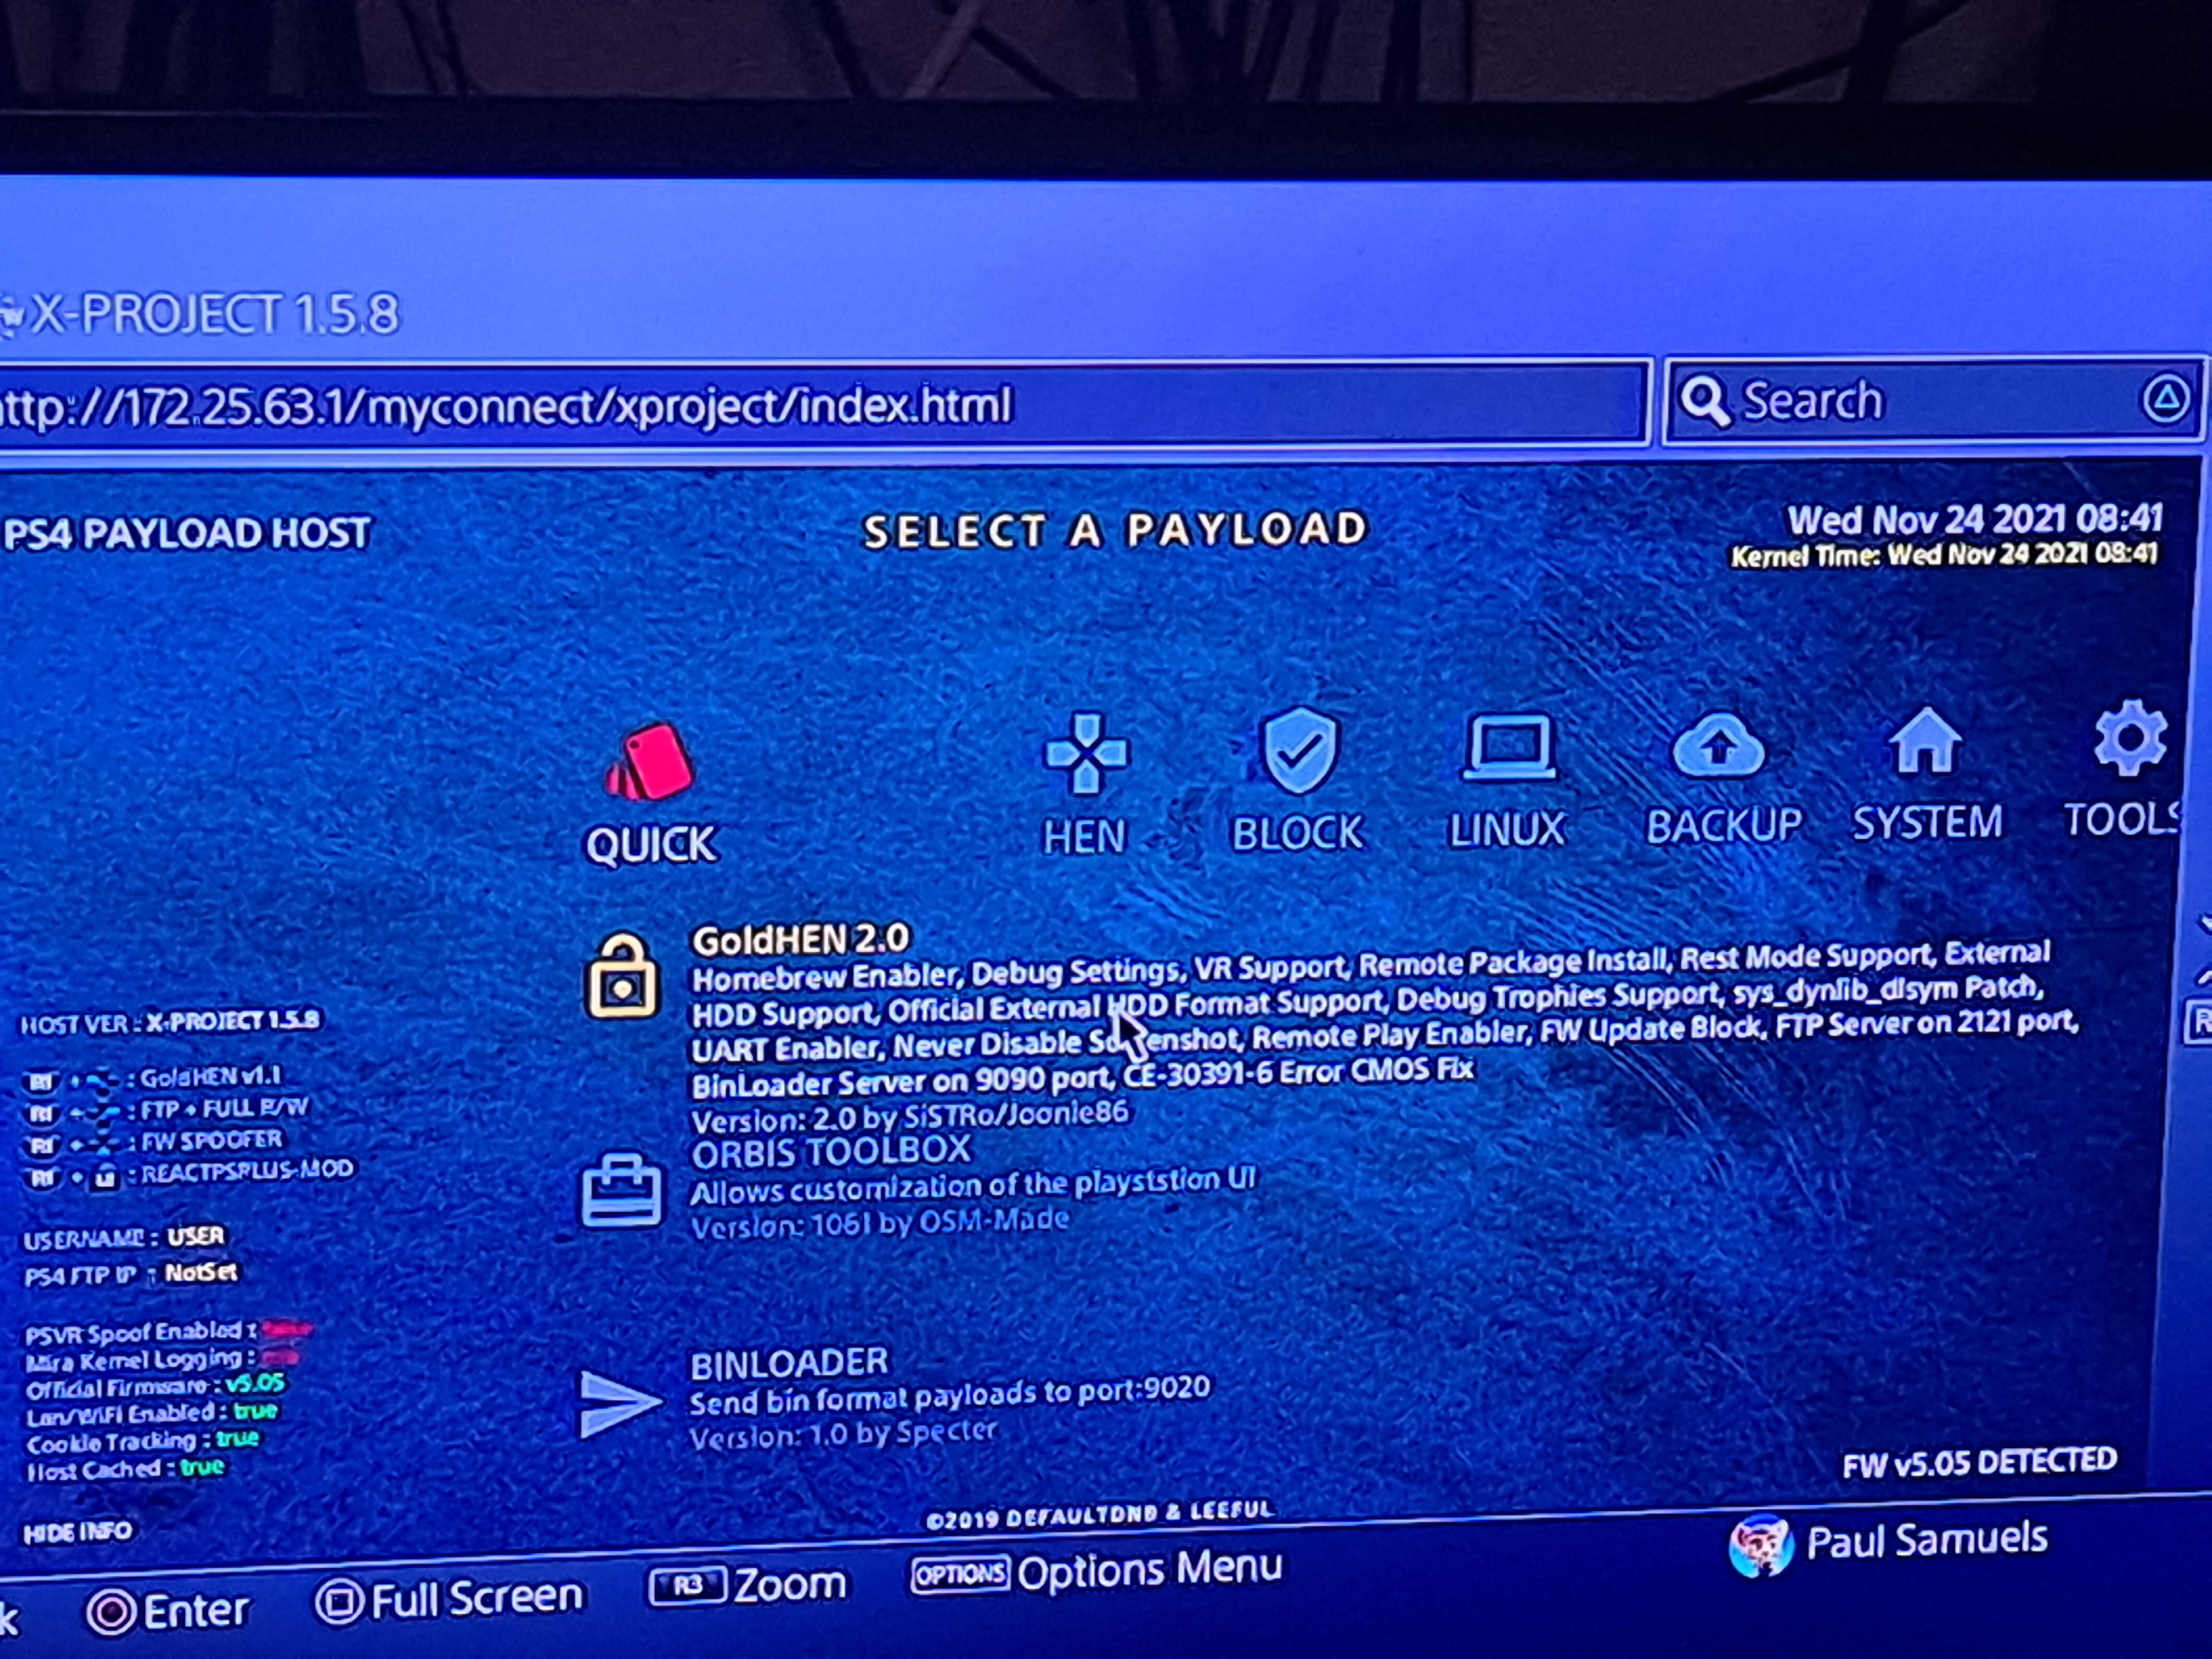 How to Make a GTA 5 PS4 Payload Mod Menu for the 9.00 Jailbreak